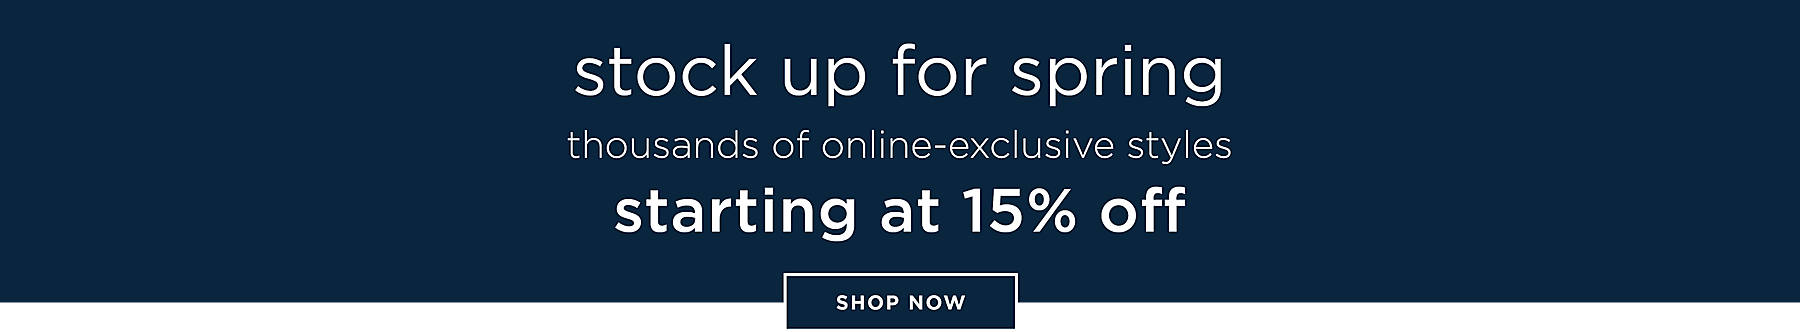 Stock up for spring thousands of online-exclusive styles starting at 15% off shop now